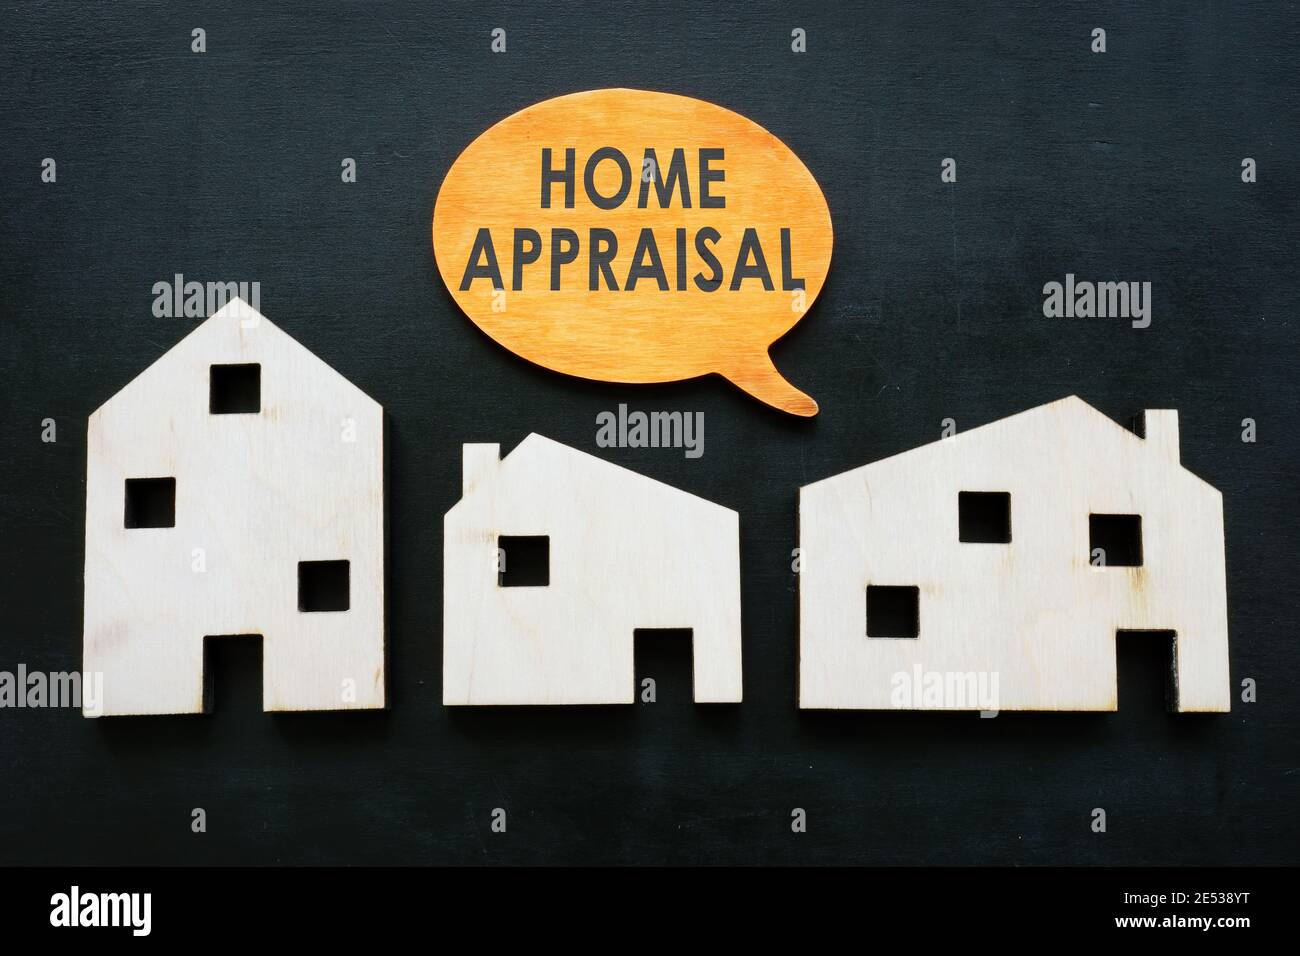 Models of houses and quote home appraisal. Property value concept. Stock Photo